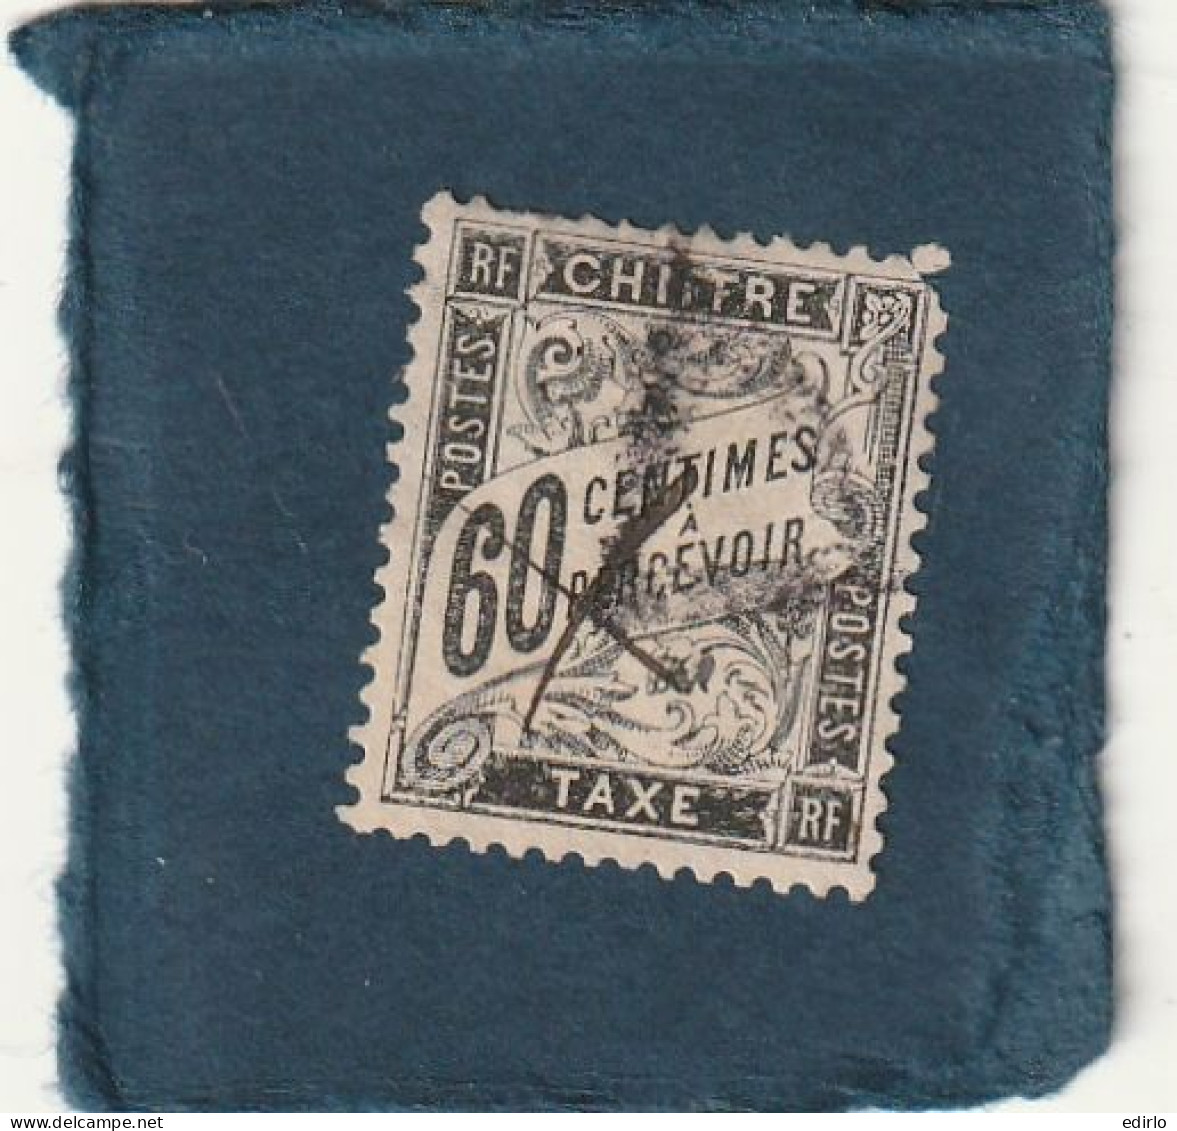 ///   FRANCE ///     N°  21 Timbre Taxe 60 Cts -- Dent ---  Côte 65€ - 1859-1959 Afgestempeld